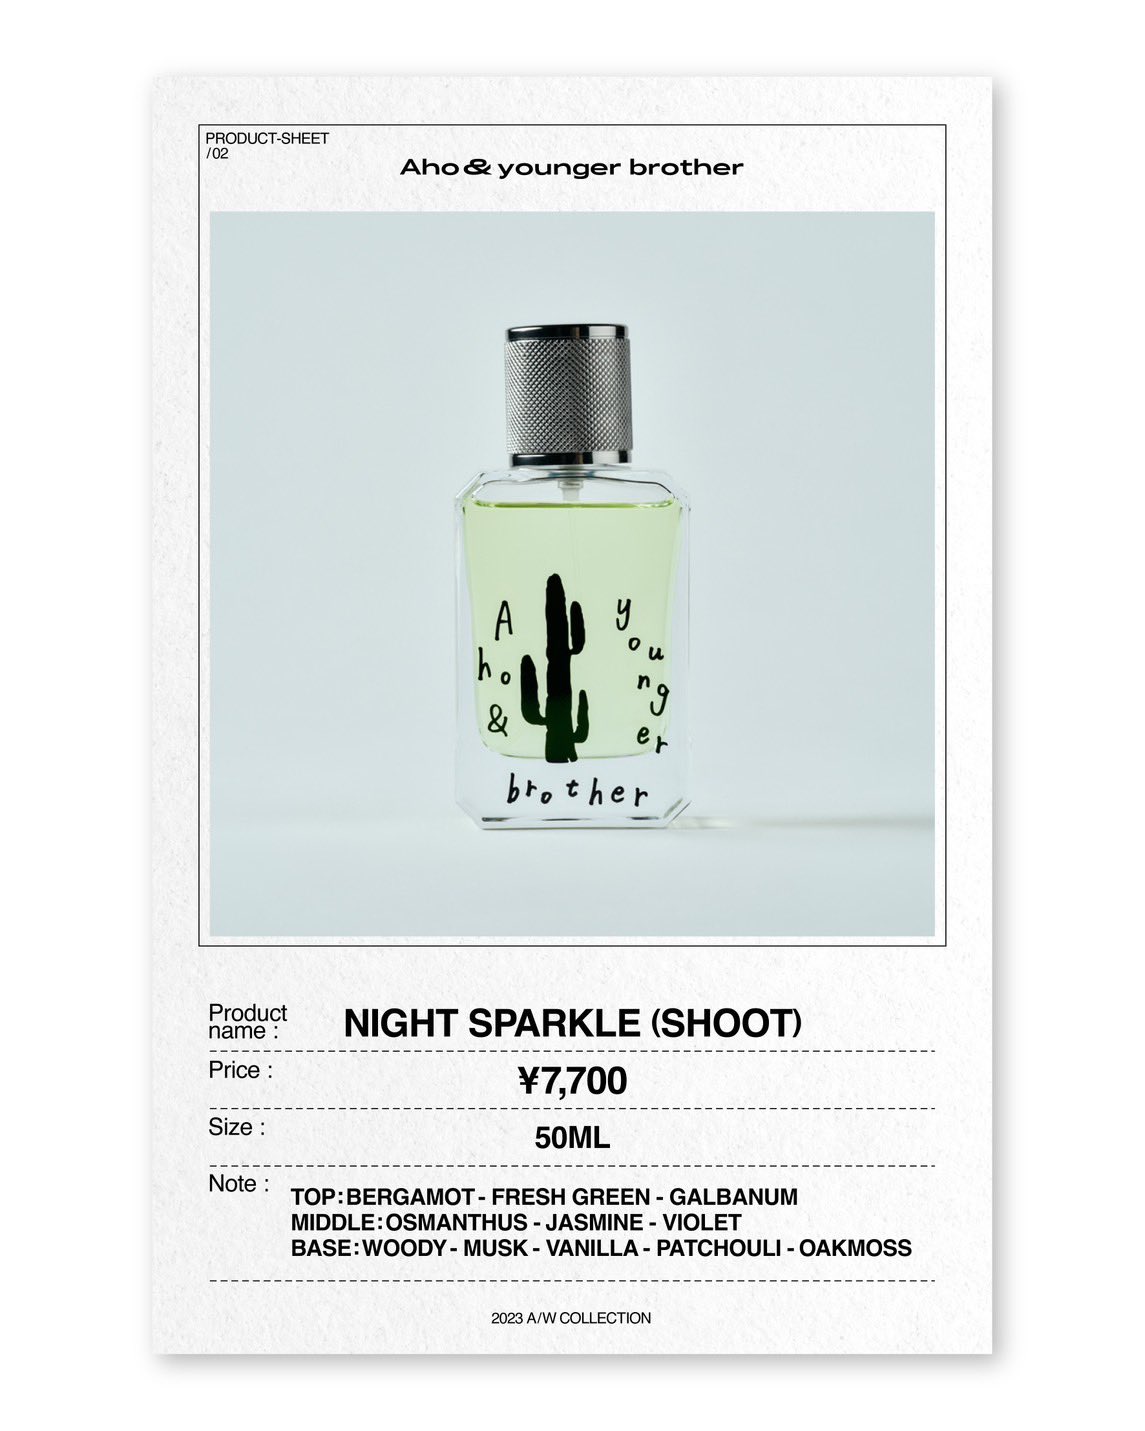 Aho＆youngbrother NIGHT SPARKLE (SHOOT)商品情報